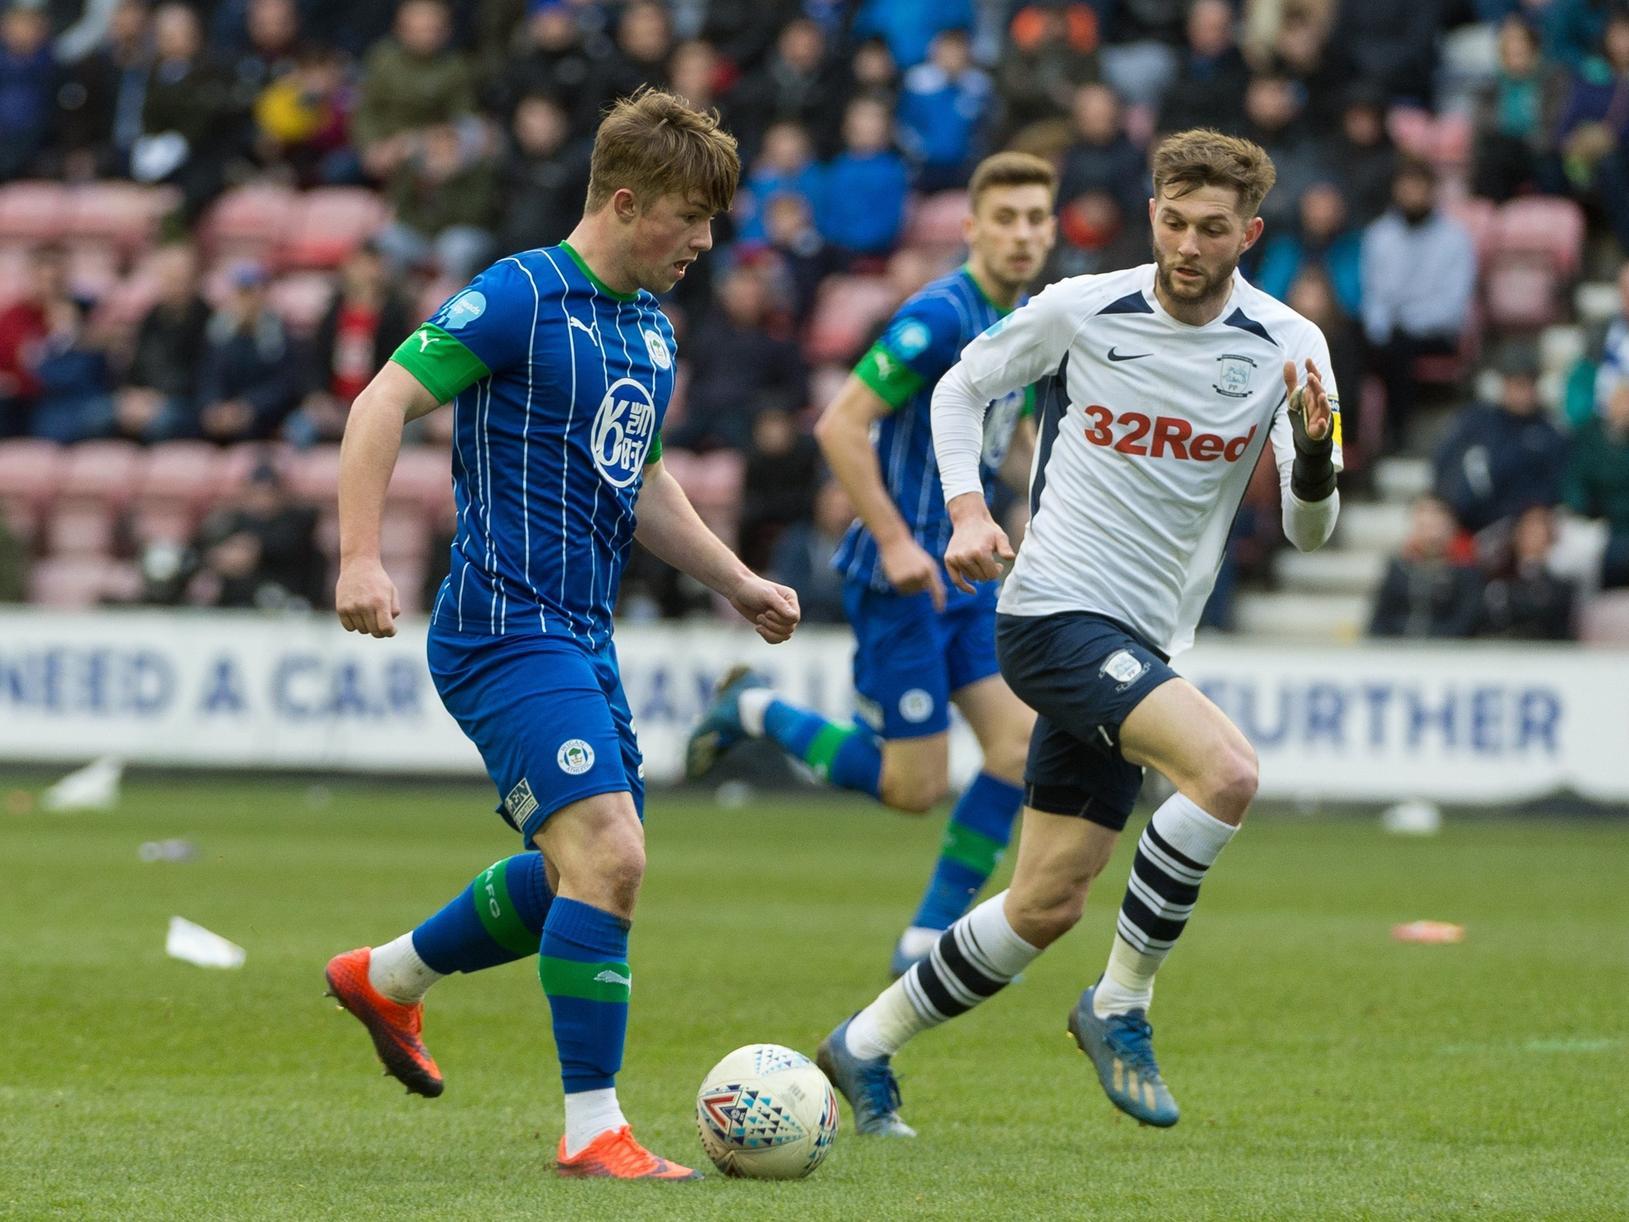 STAR MAN: Sub: Joe Gelhardt (for Evans, 55): 8 - Game turned on its head when he came on, sparked Latics - and the crowd - into life, immediately laid on the goal and frightened the defence every time he got it